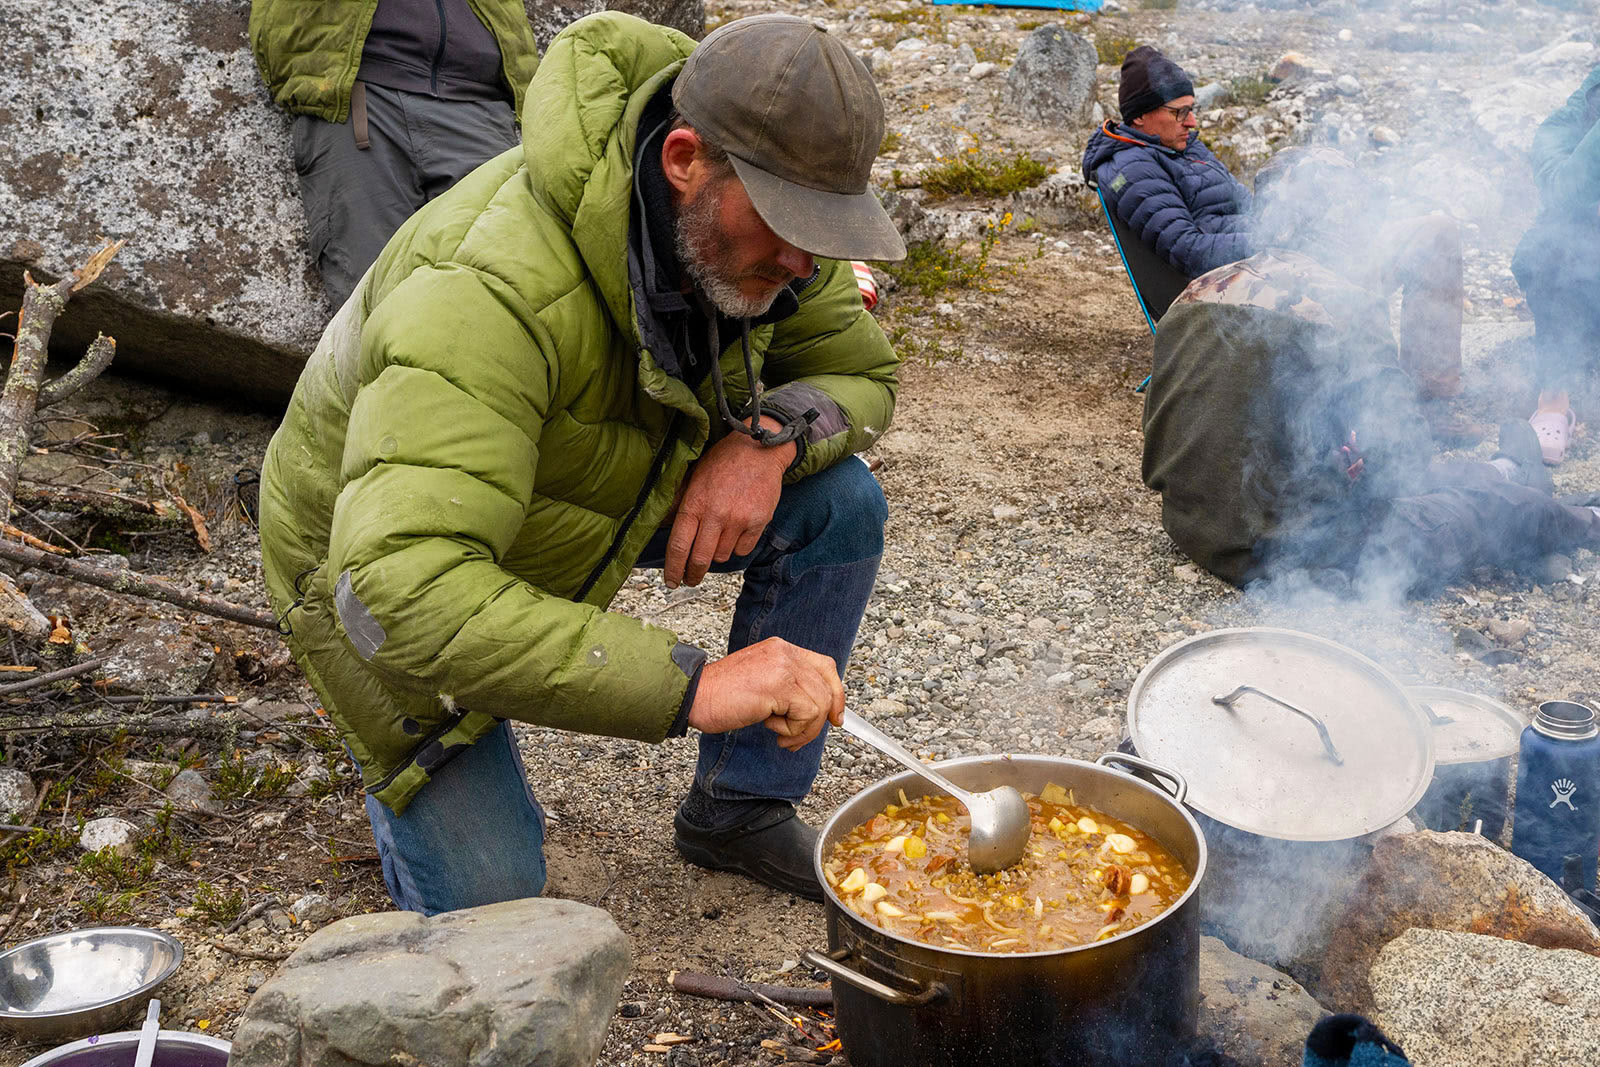 A man in a green jacket cooks a stew over an open fire in Patagonia, Chile.